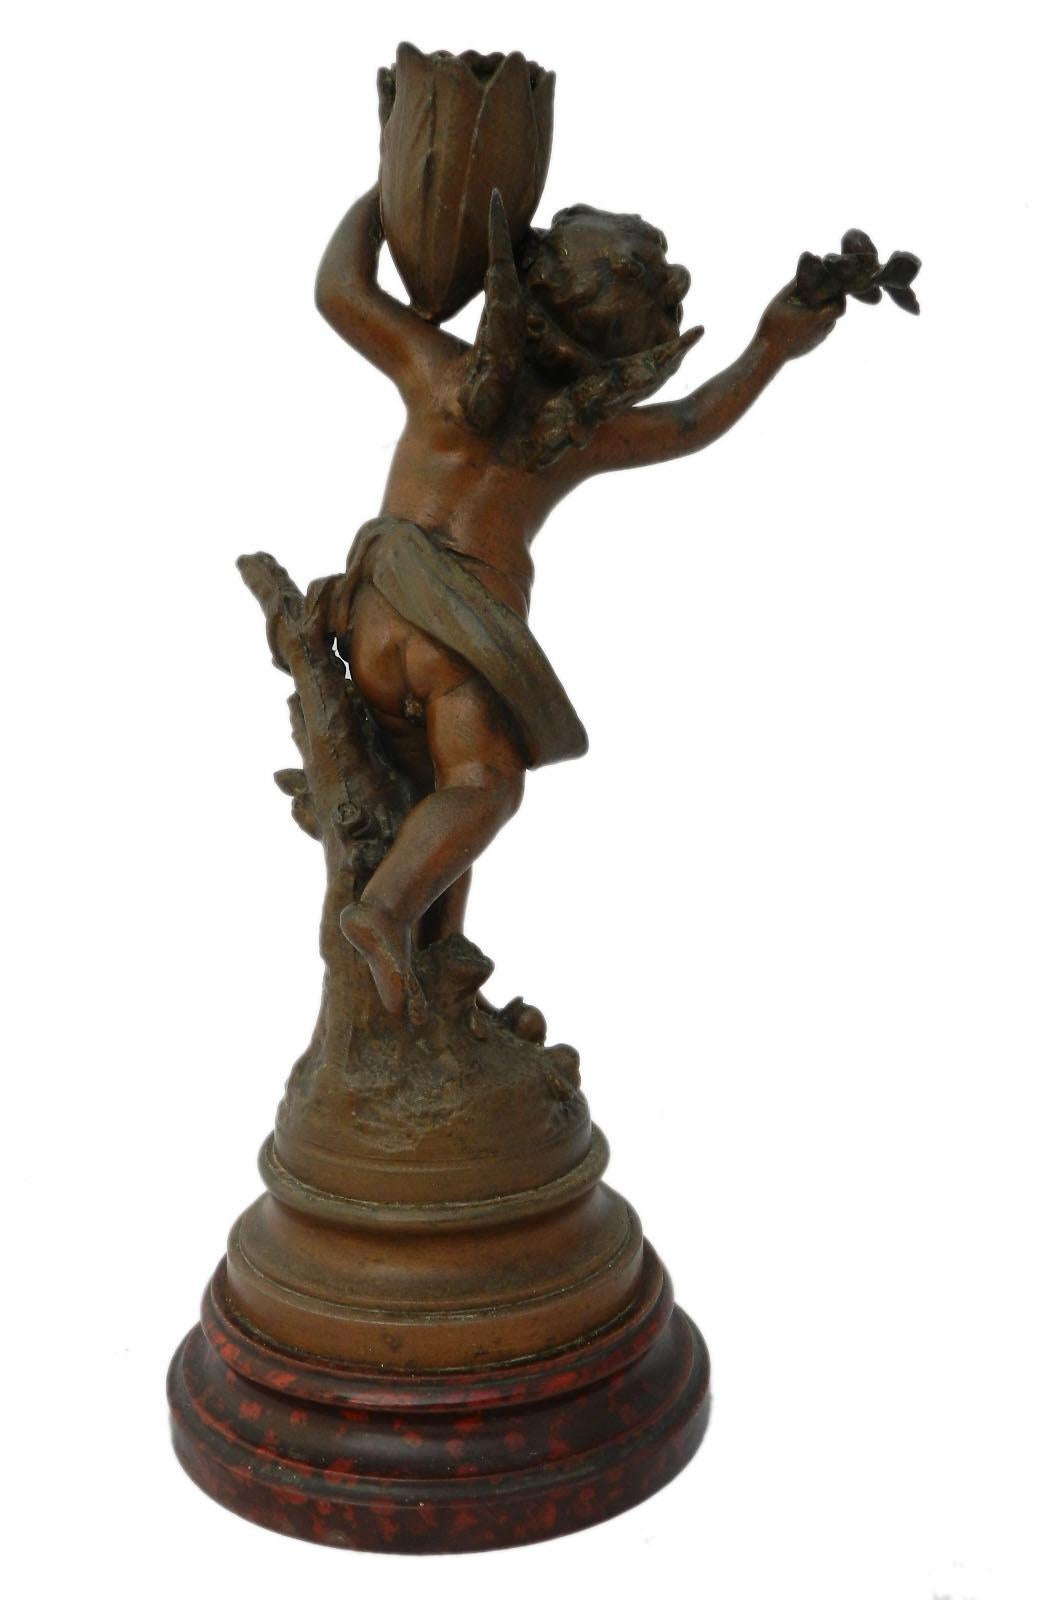 Cherub candlestick by Auguste Moreau Spelter, 19th century
Signed in the base Aug Moreau
Good antique condition with minor signs of age and wear to the spelter but still has all of its absolute charm
Auguste Moreau 1834-1917 was a French sculptor